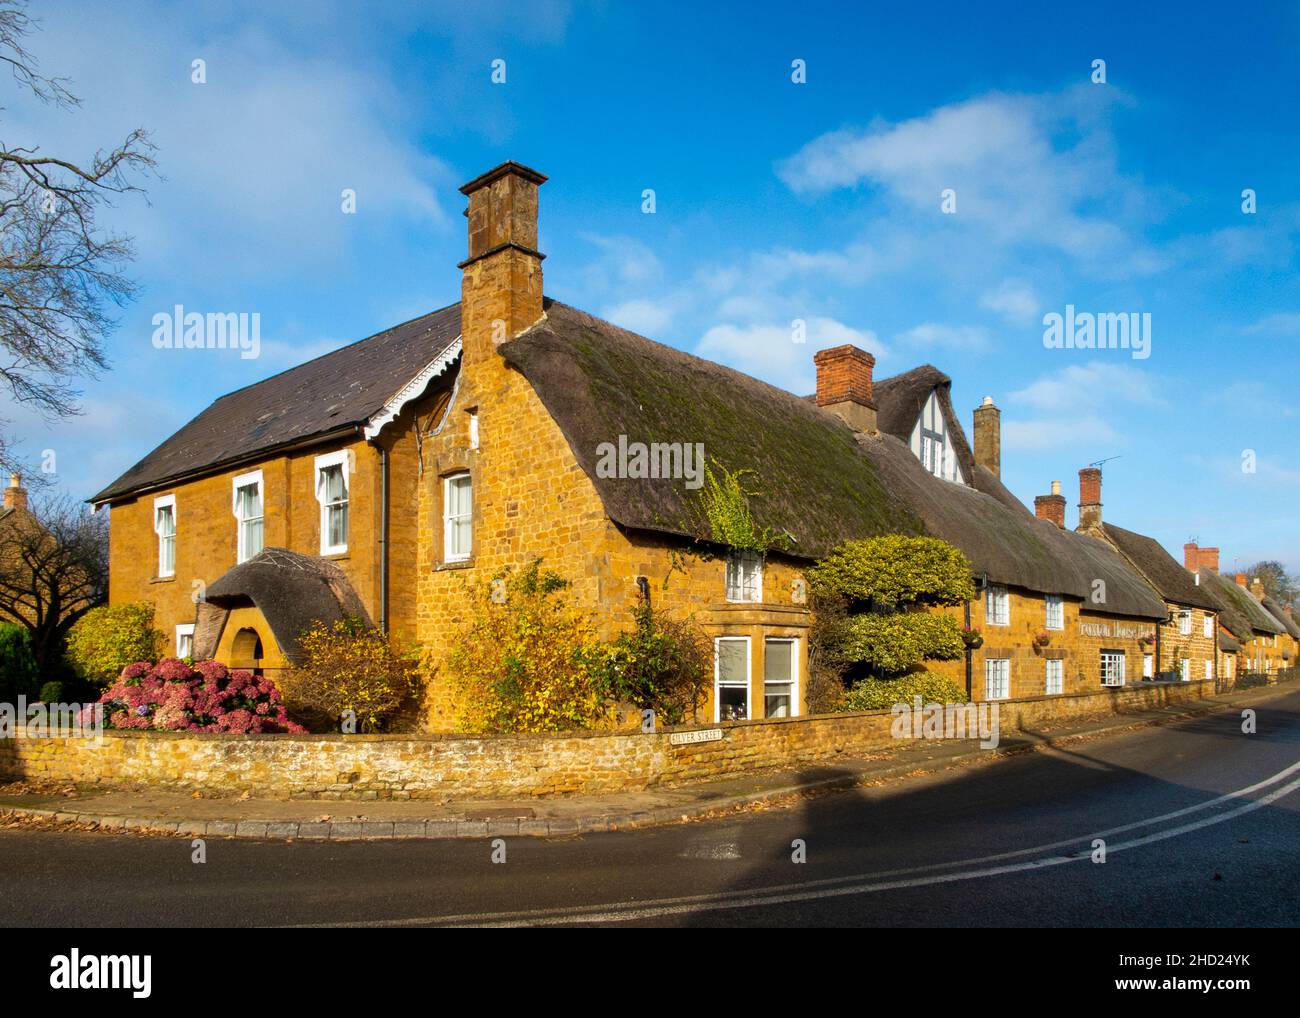 UK, England, Oxfordshire, Banbury, Wroxton, Silver Street, Wroxton House Hotel in attractive cottages Stock Photo